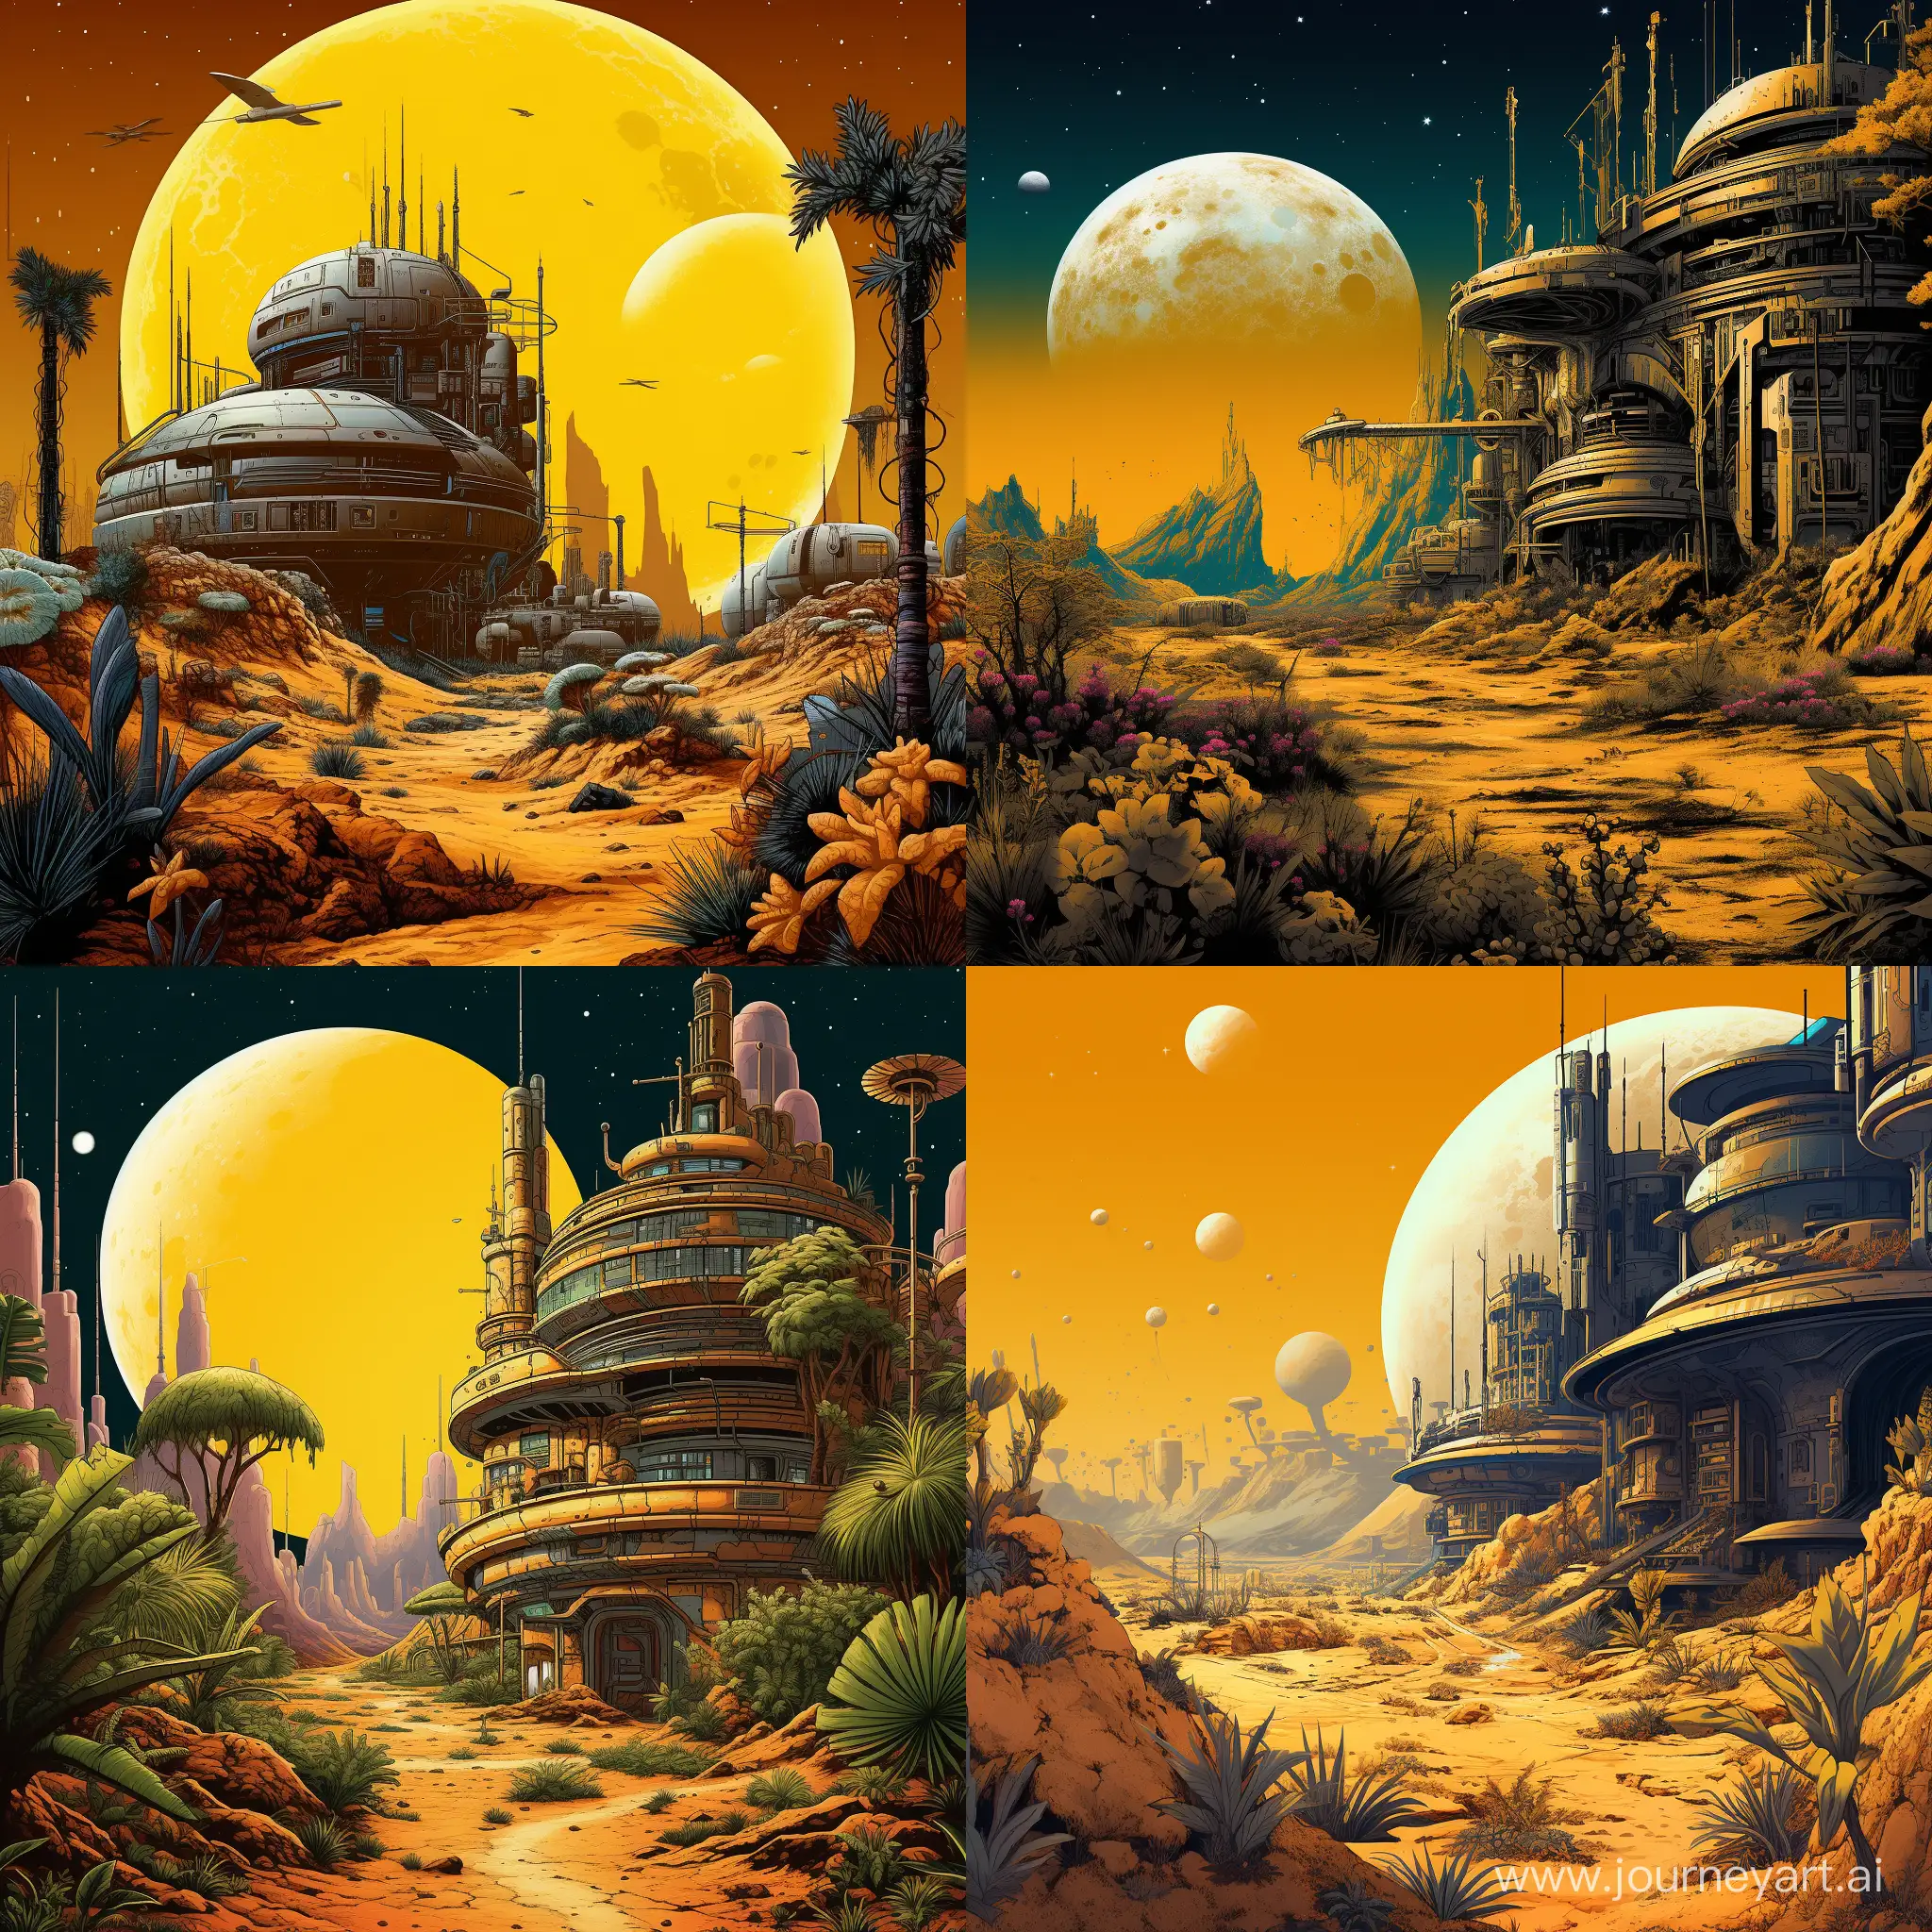 Scenery. A small yellow moon with a small space outpost on it. There are spaceships on the landing pads, and to the left you can see an old-fashioned building in the retro futurist style. Множество густых растений вокруг окутывают старые здания и брошенные корабли. Ярко-жёлтый грунт, чёрное небо.